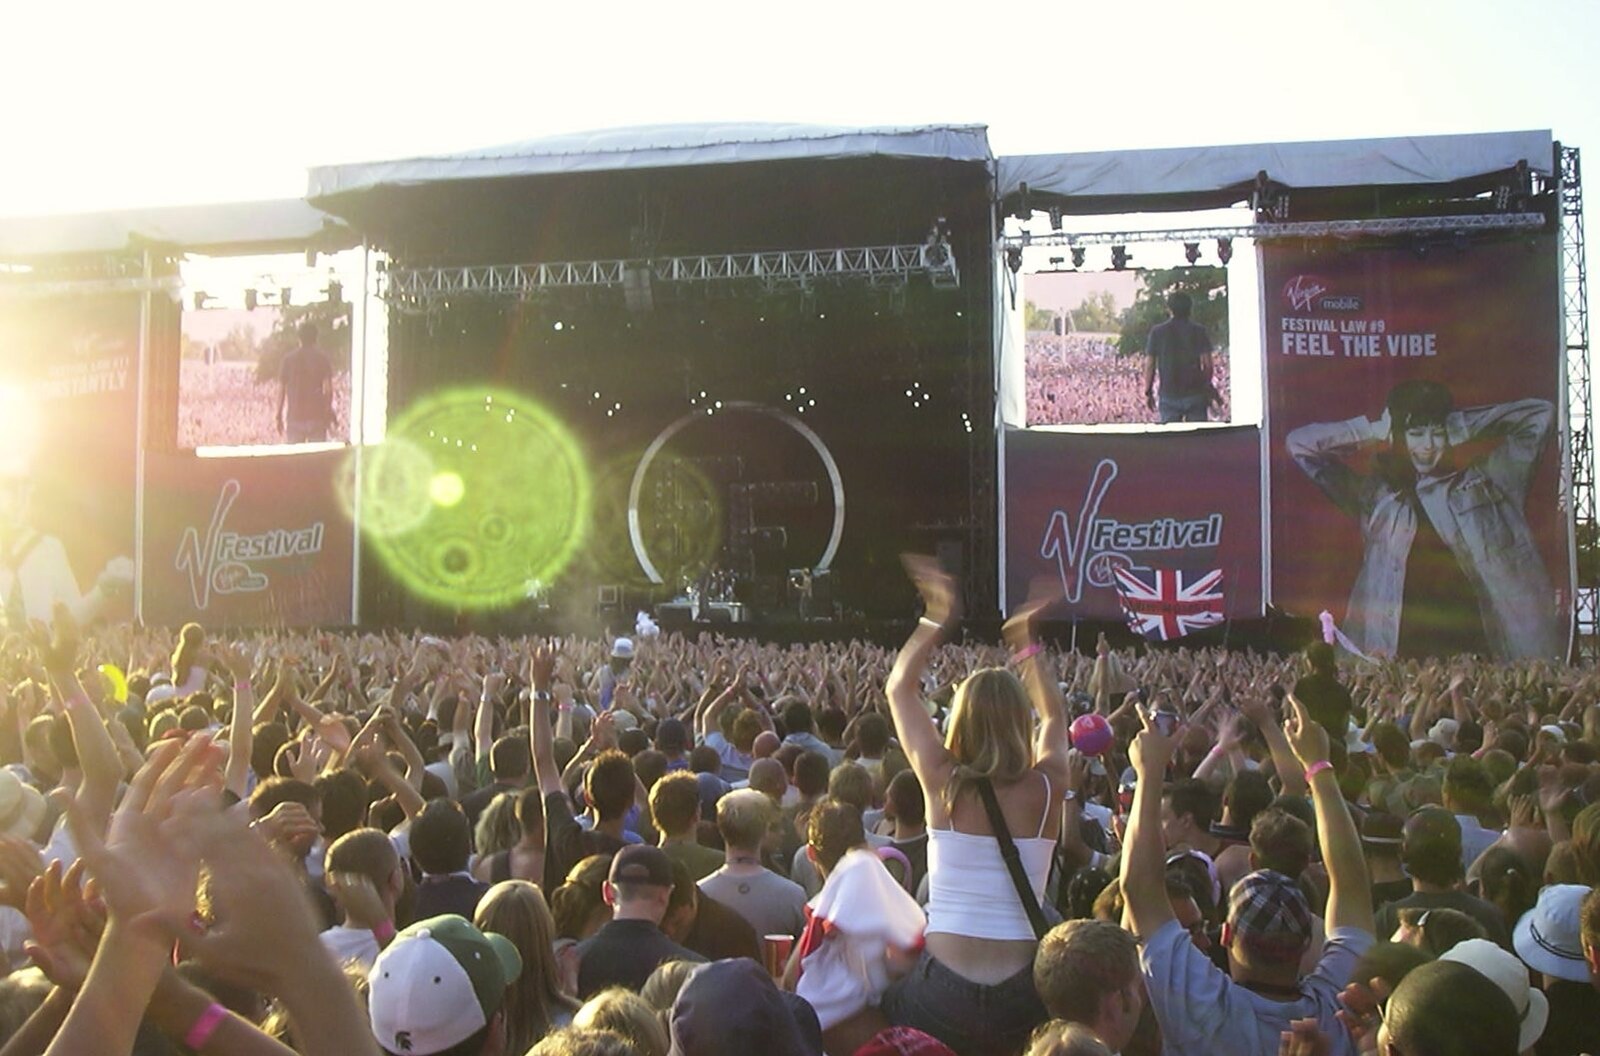 The Foo Fighters take to the stage from V Festival 2003, Hyland's Park, Chelmsford, Essex - 16th August 2003